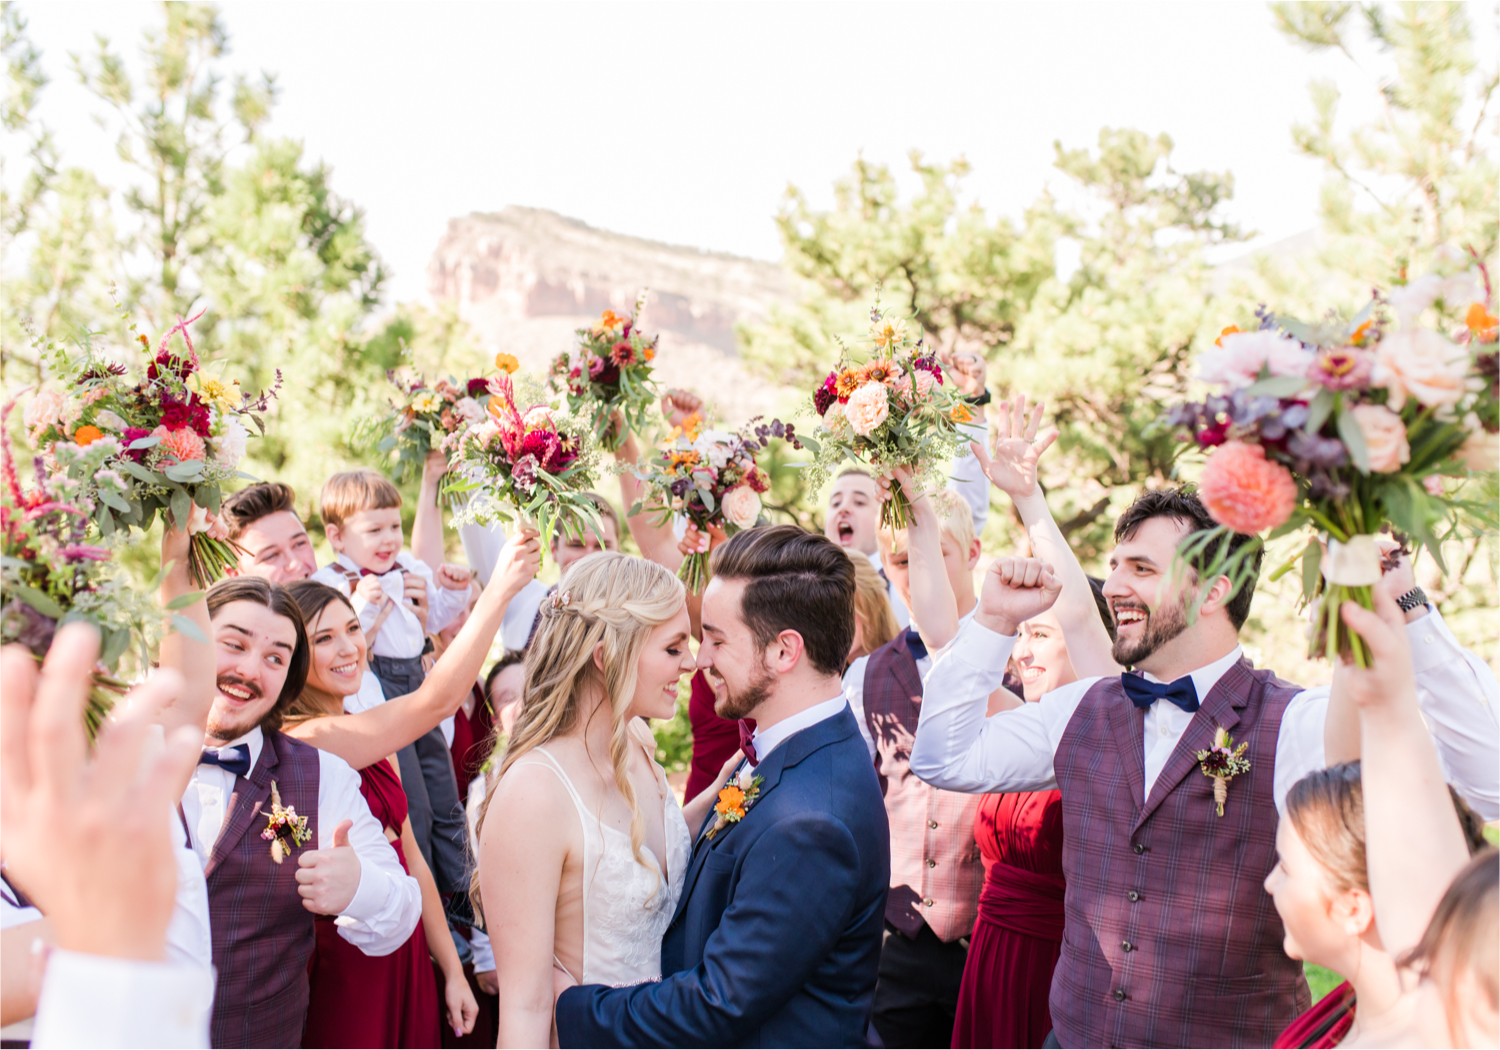 Romantic Whimsical Wedding at the Lionscrest Manor in Lyons, CO | Britni Girard Photography - Wedding Photo and Video Team | Rustic Fall Decor mixed in Burgundy, Blush, Gold and Sage | Large Bridal Party | Groom Custom Suit from Jos. a Banks | Bride Wedding Dress Anna Be Bridal, Hailey Paige | Florals By Aflorae | 